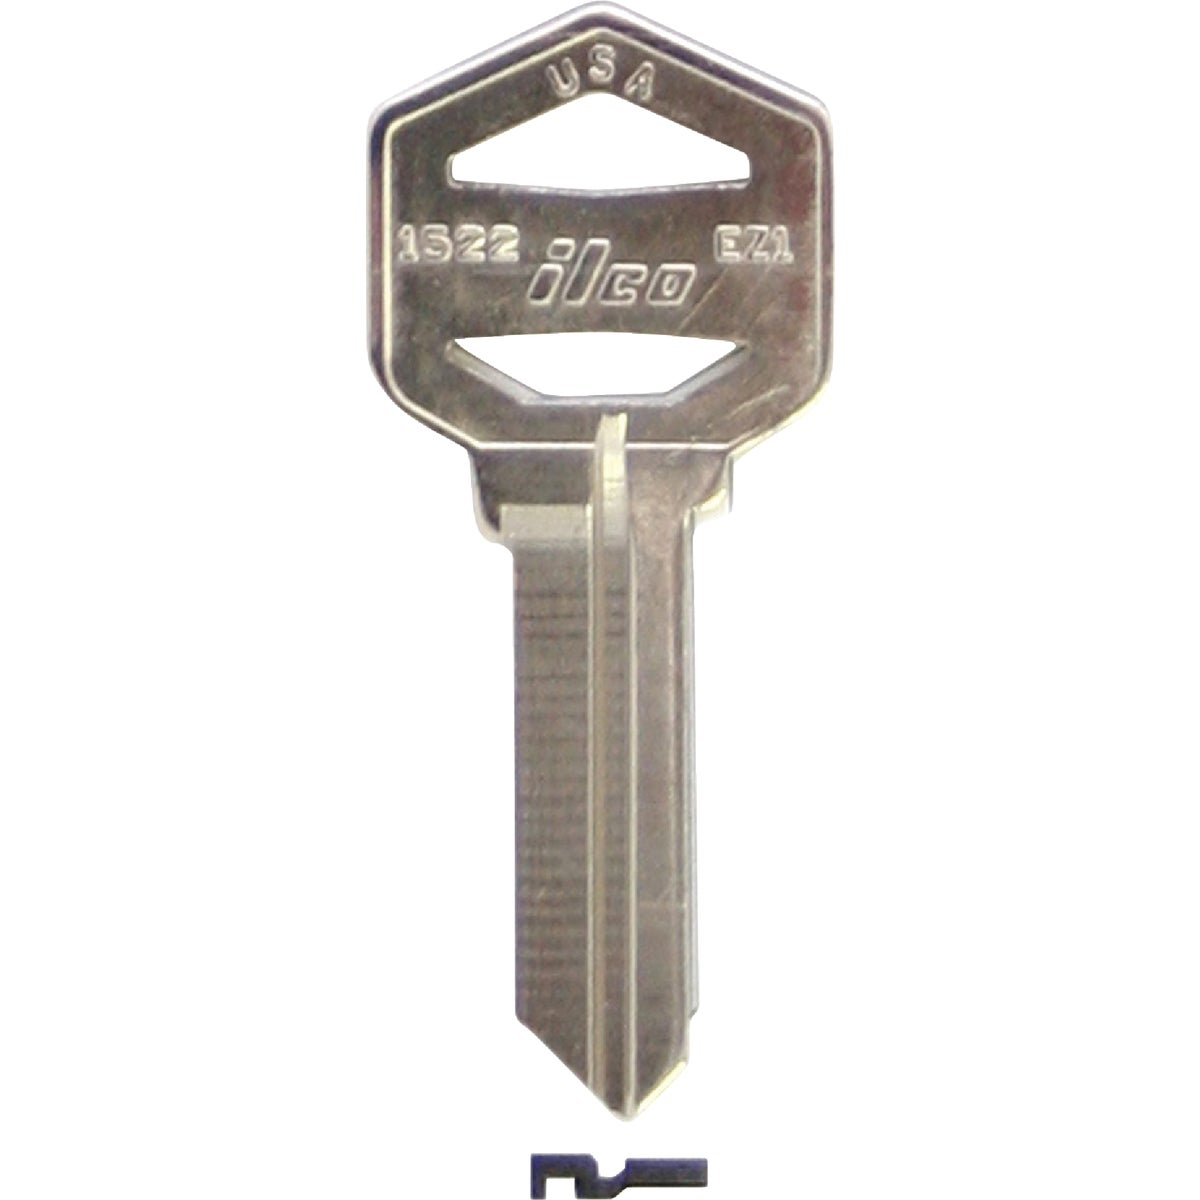 Item 200549, Nickel-plated key blank. When you order one, you will receive 10 keys.